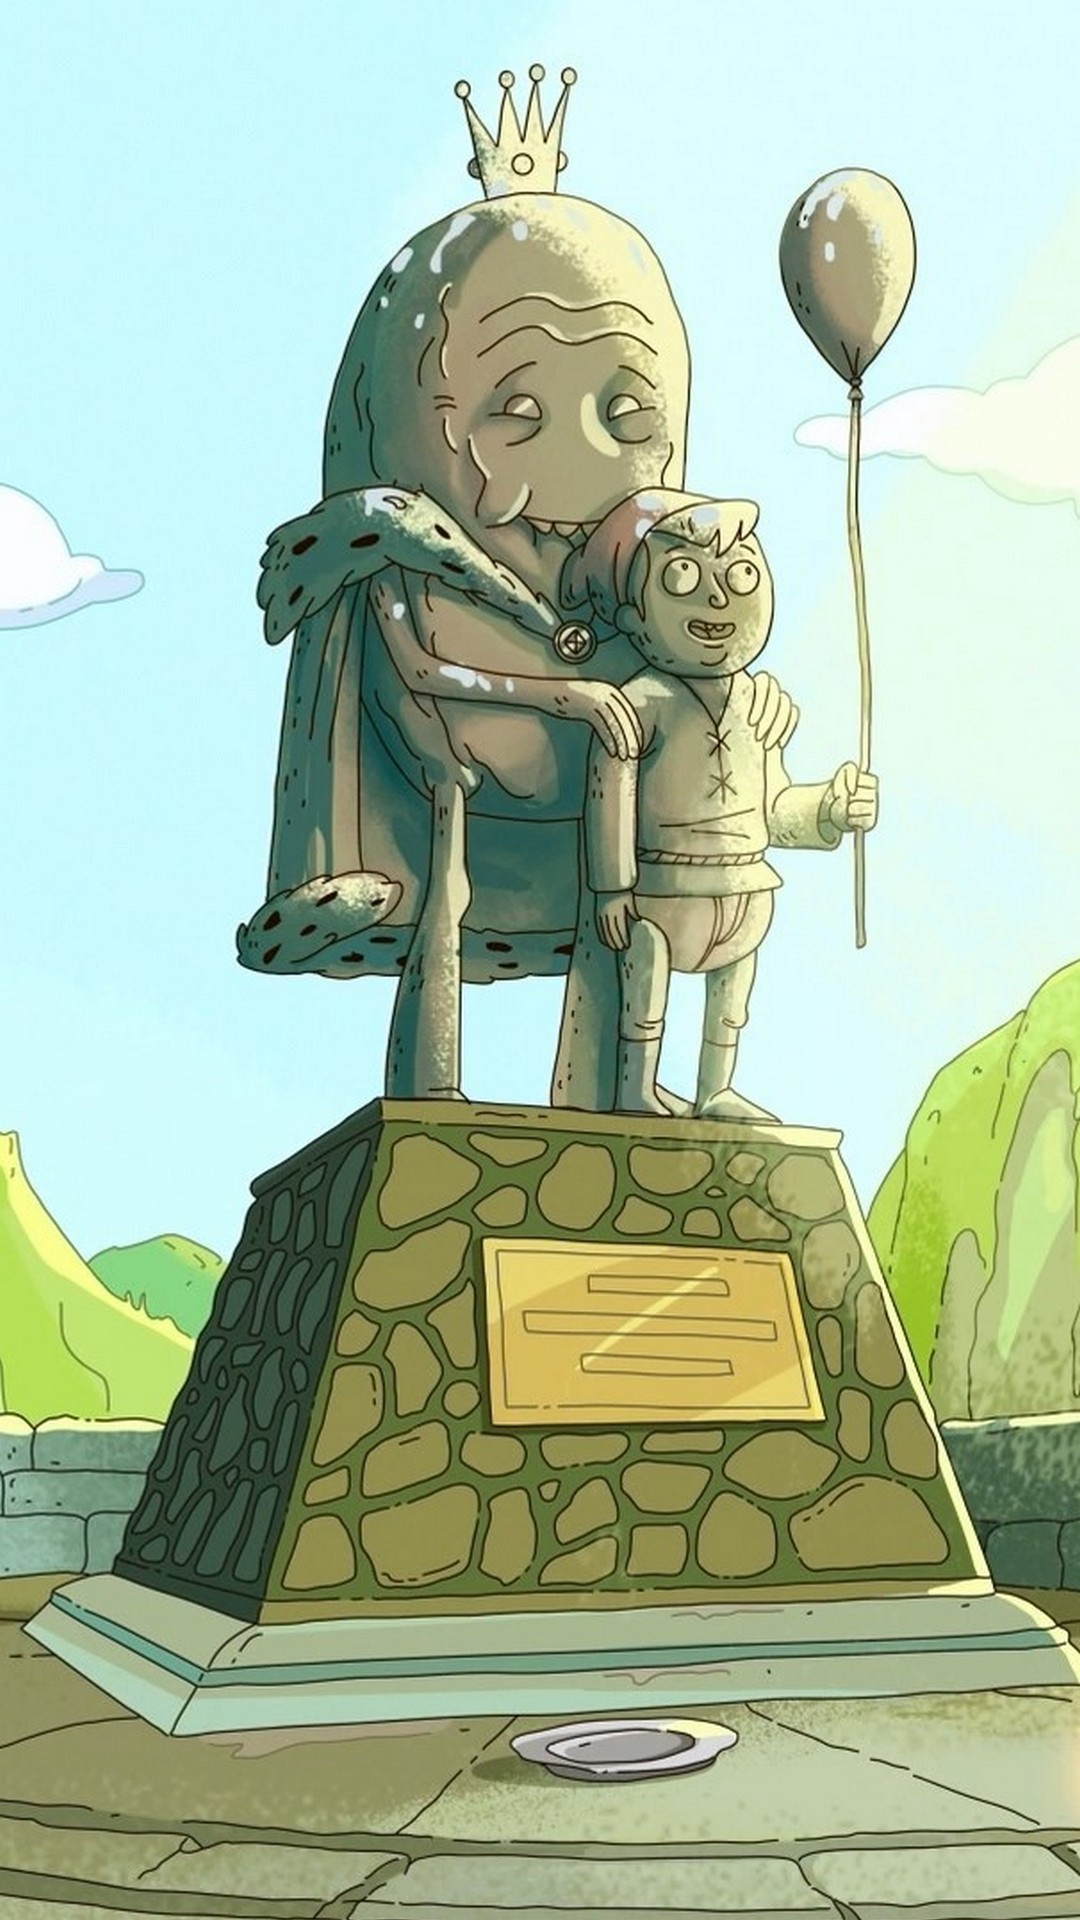 Rick and Morty 1080p iPhone Wallpaper with high-resolution 1080x1920 pixel. You can use this wallpaper for your iPhone 5, 6, 7, 8, X, XS, XR backgrounds, Mobile Screensaver, or iPad Lock Screen